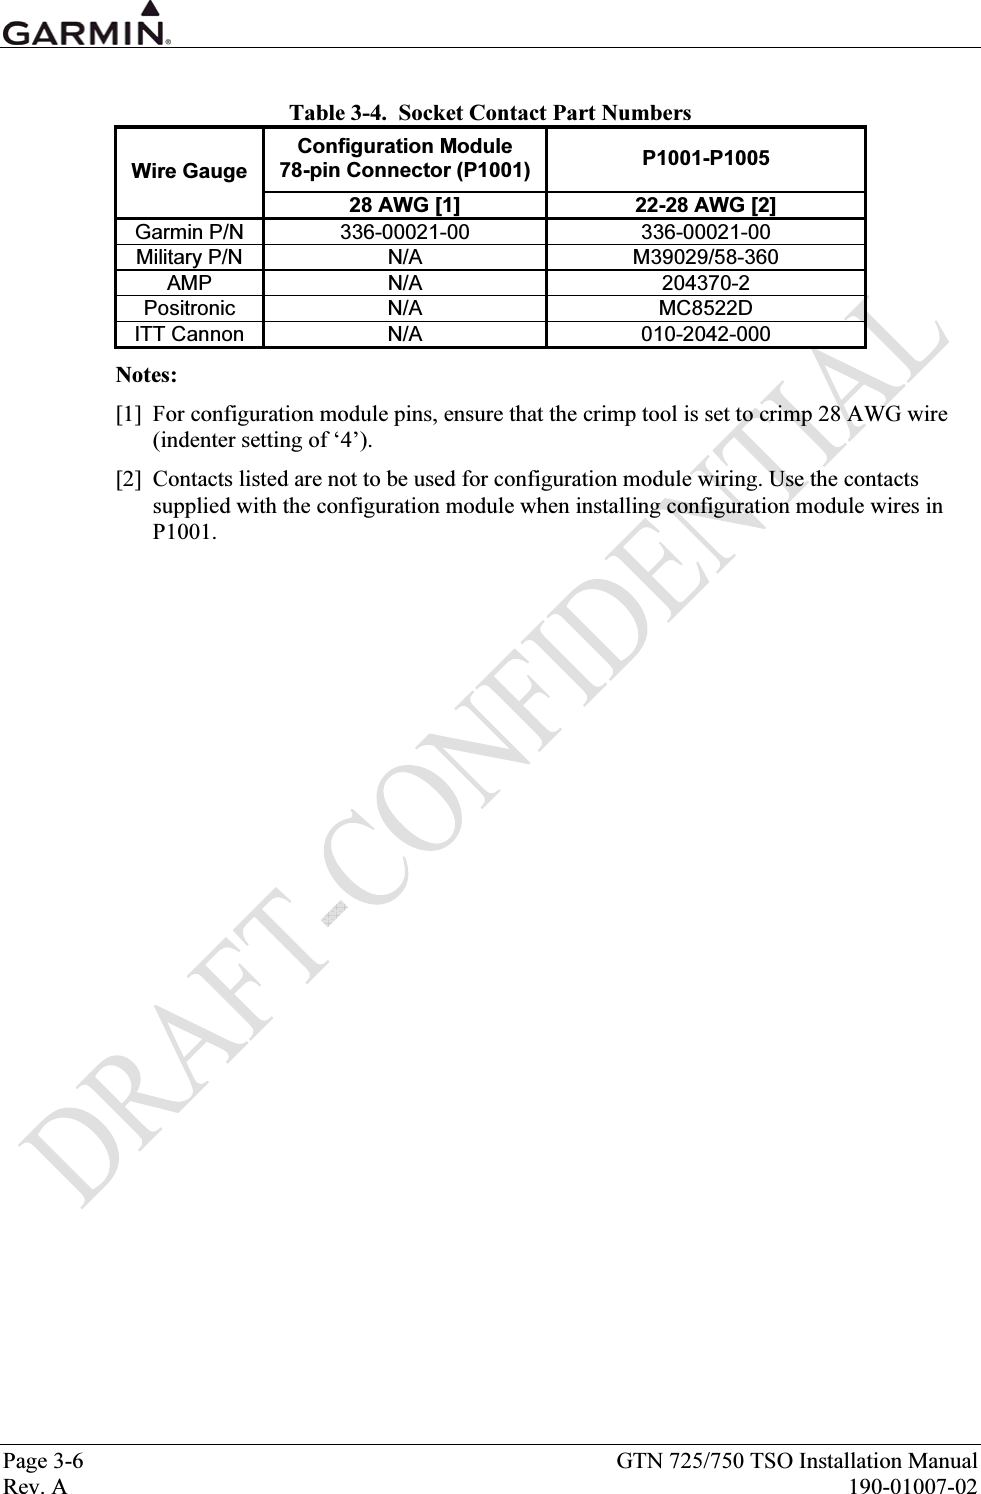  Page 3-6  GTN 725/750 TSO Installation Manual Rev. A  190-01007-02  Table 3-4.  Socket Contact Part Numbers Configuration Module  78-pin Connector (P1001)  P1001-P1005 Wire Gauge 28 AWG [1]  22-28 AWG [2] Garmin P/N  336-00021-00  336-00021-00 Military P/N  N/A  M39029/58-360 AMP N/A  204370-2 Positronic N/A  MC8522D ITT Cannon  N/A  010-2042-000 Notes: [1]  For configuration module pins, ensure that the crimp tool is set to crimp 28 AWG wire (indenter setting of ‘4’).  [2]  Contacts listed are not to be used for configuration module wiring. Use the contacts supplied with the configuration module when installing configuration module wires in P1001. 